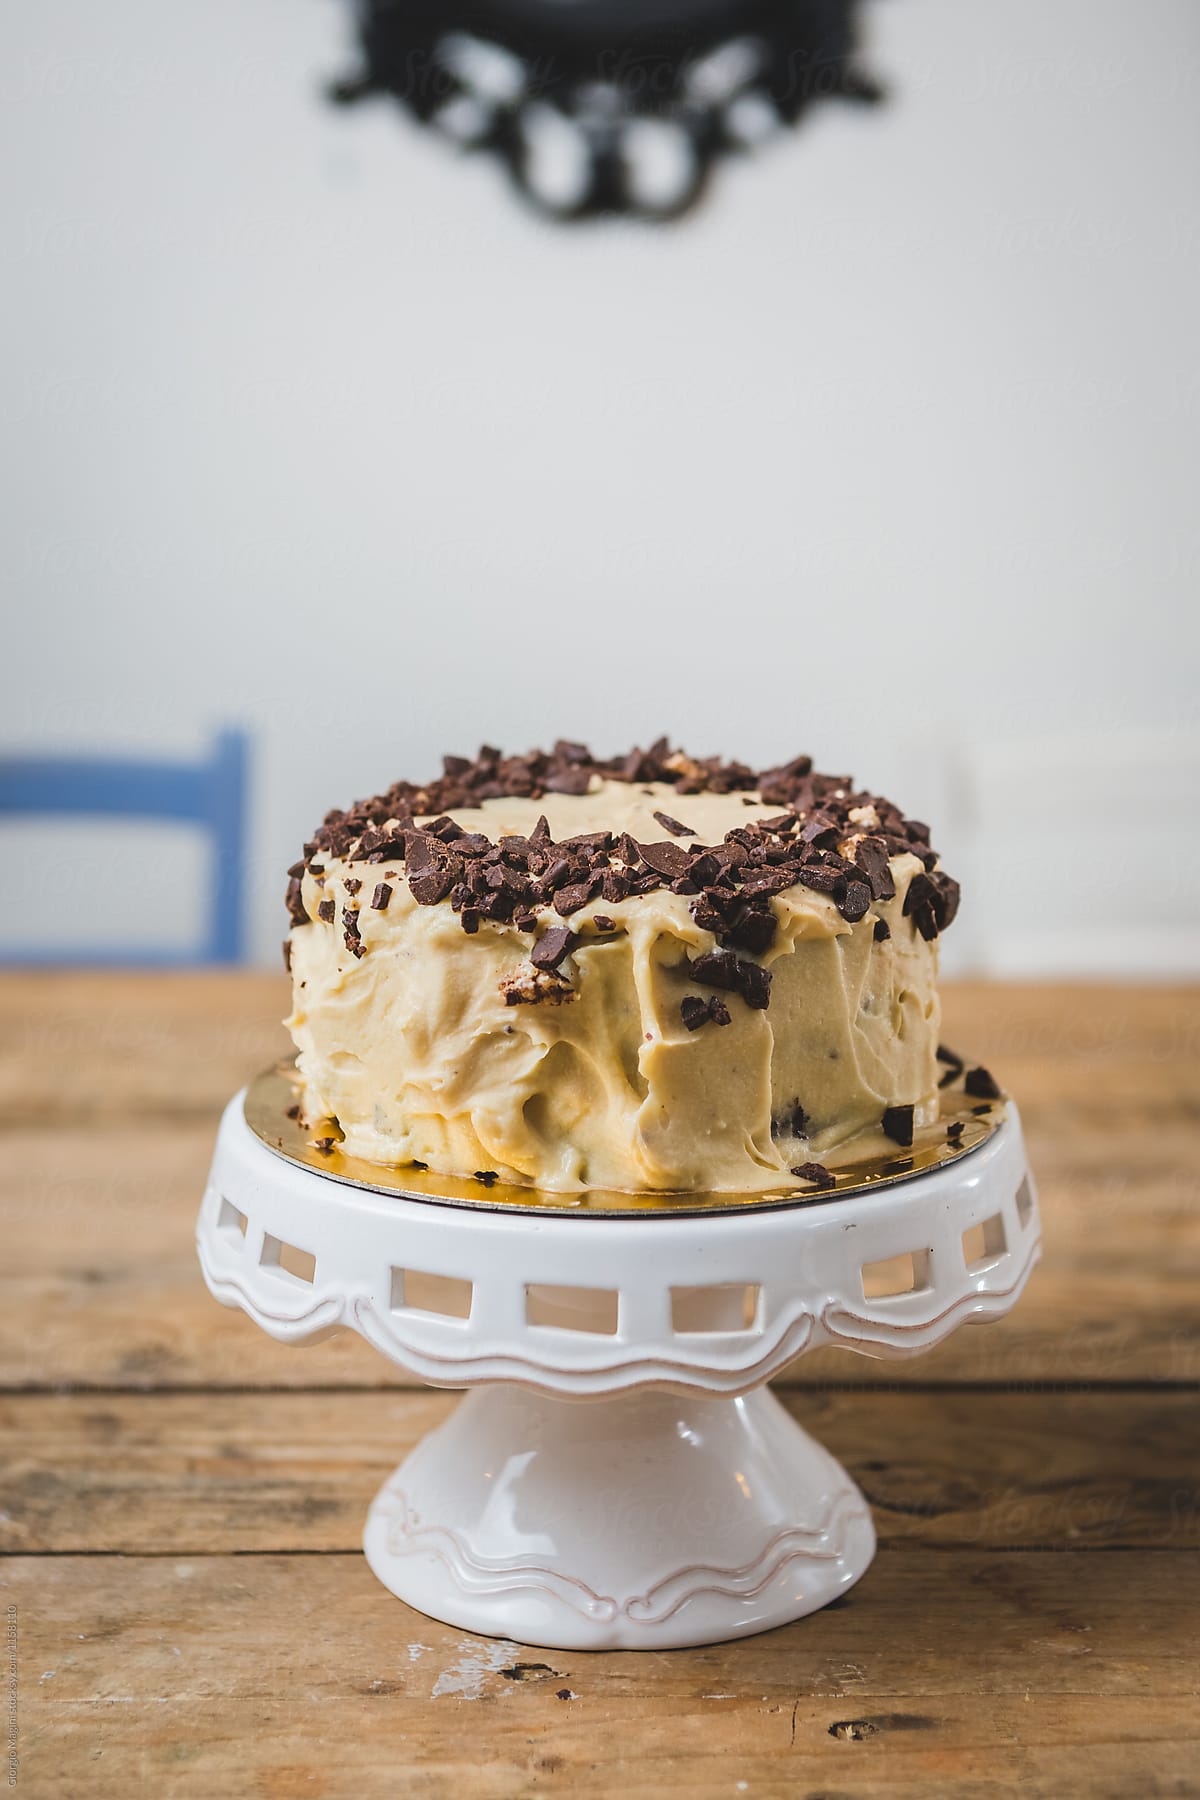 Cream and Coffee Cake with Chocolate Nuggets on Top